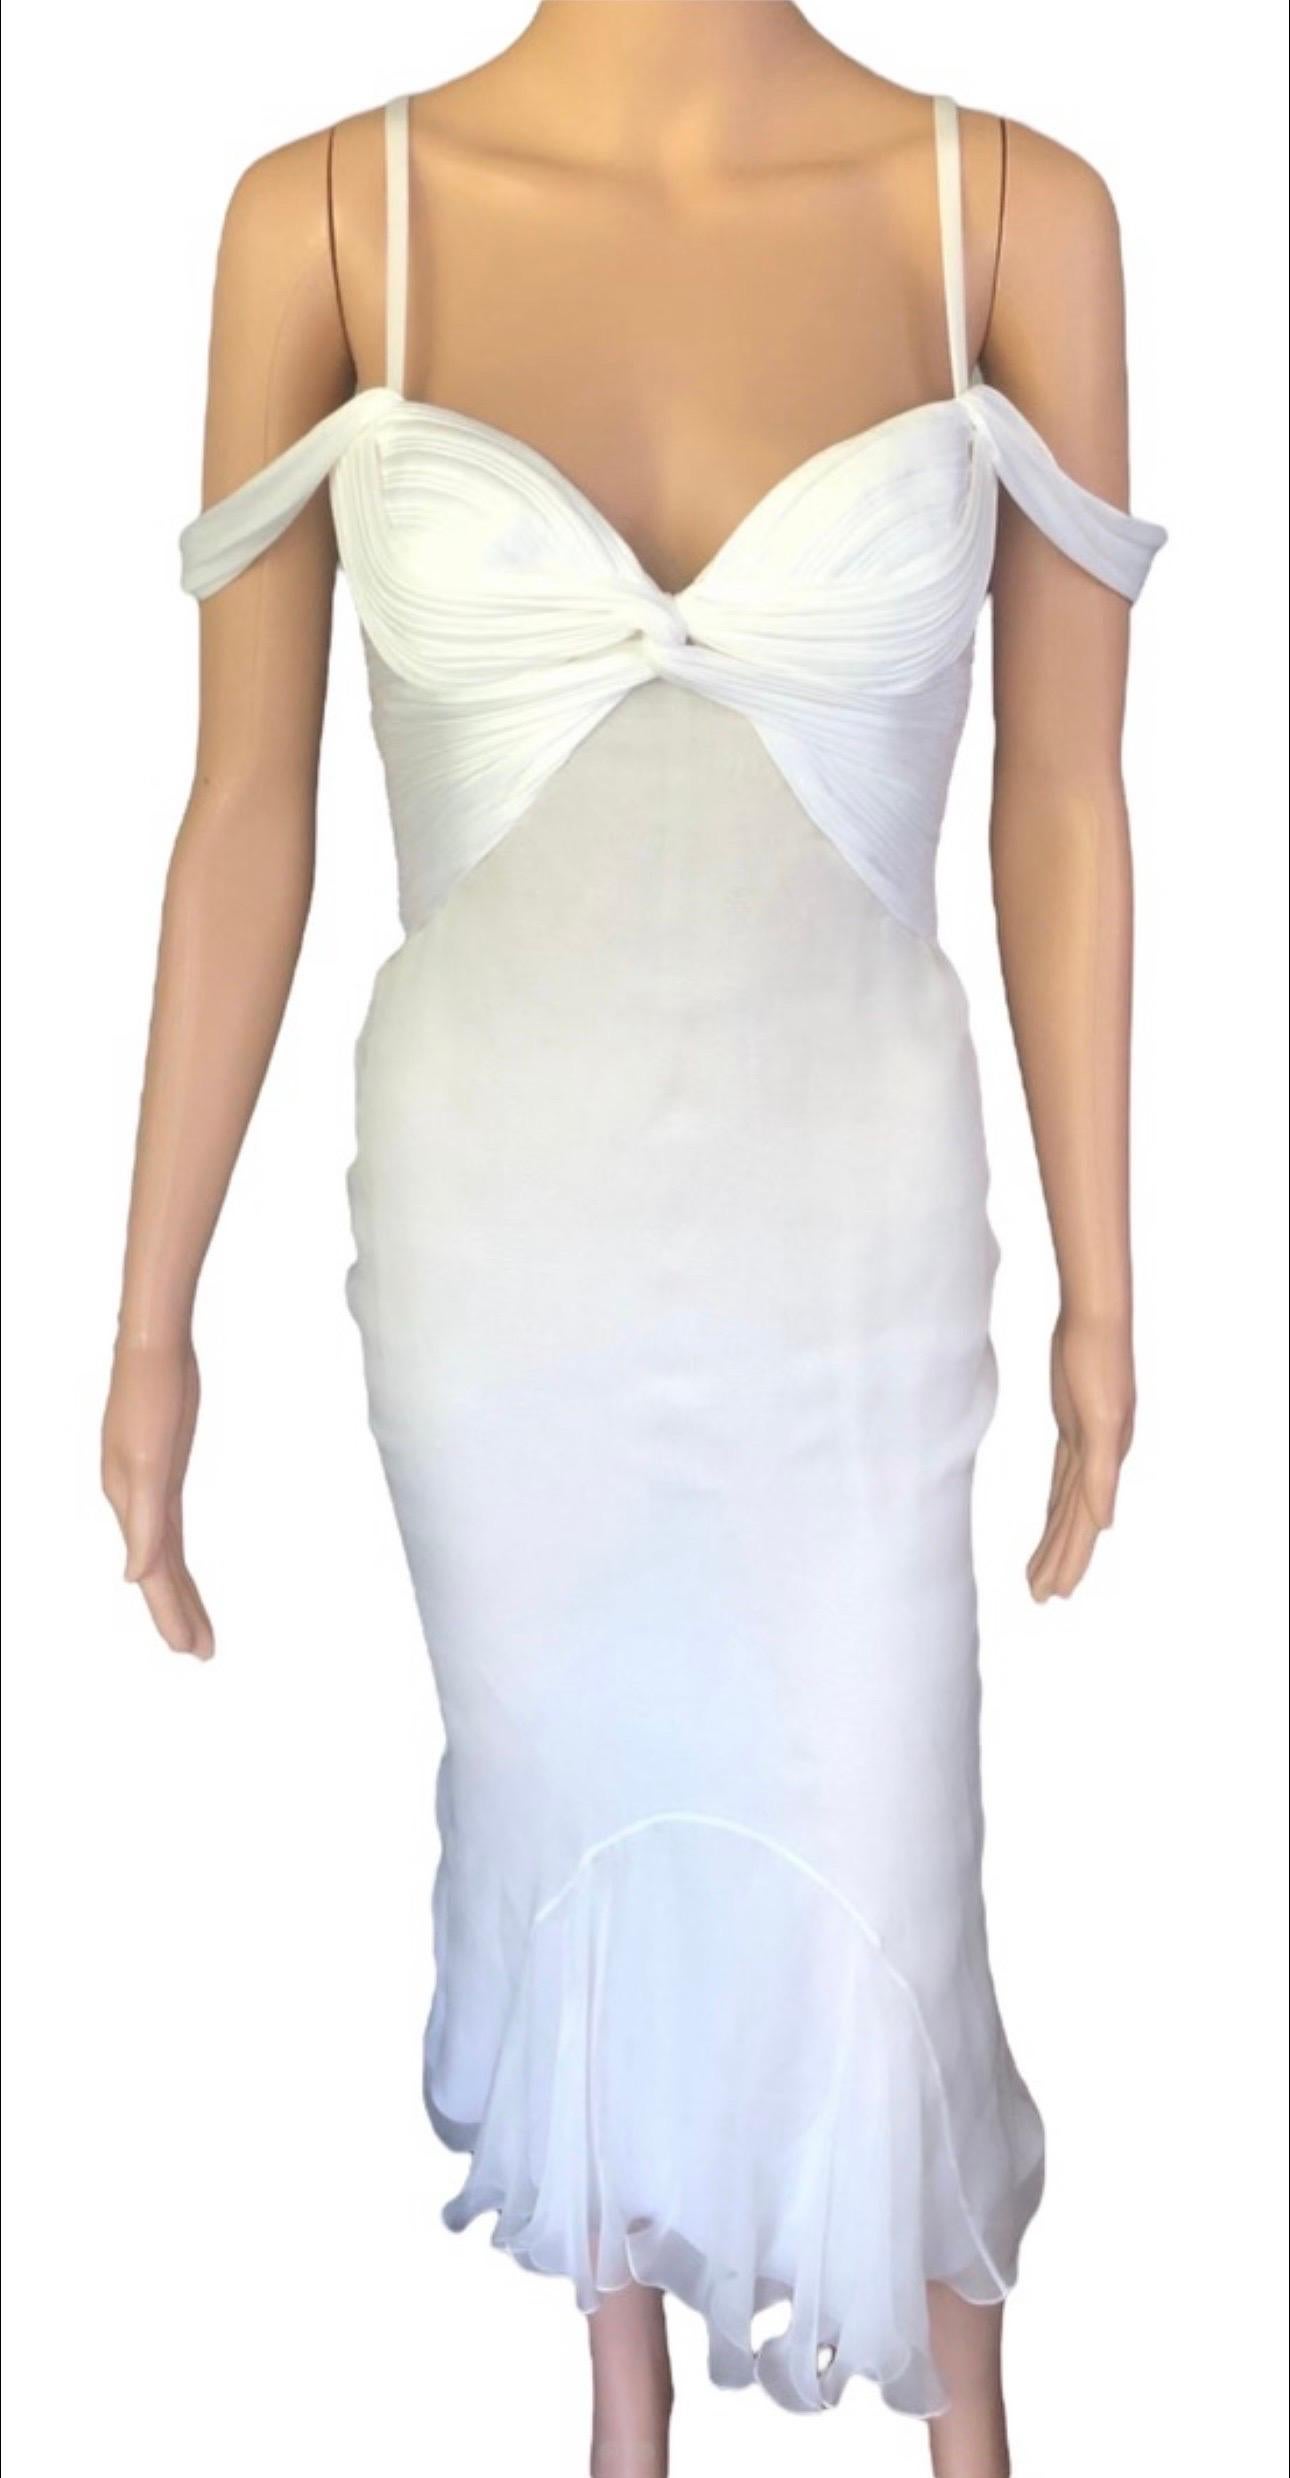 Versace S/S 2006 Runway Bustier Cutout Back Ivory Dress IT 40

Look 41 from the Spring 2006 Collection.